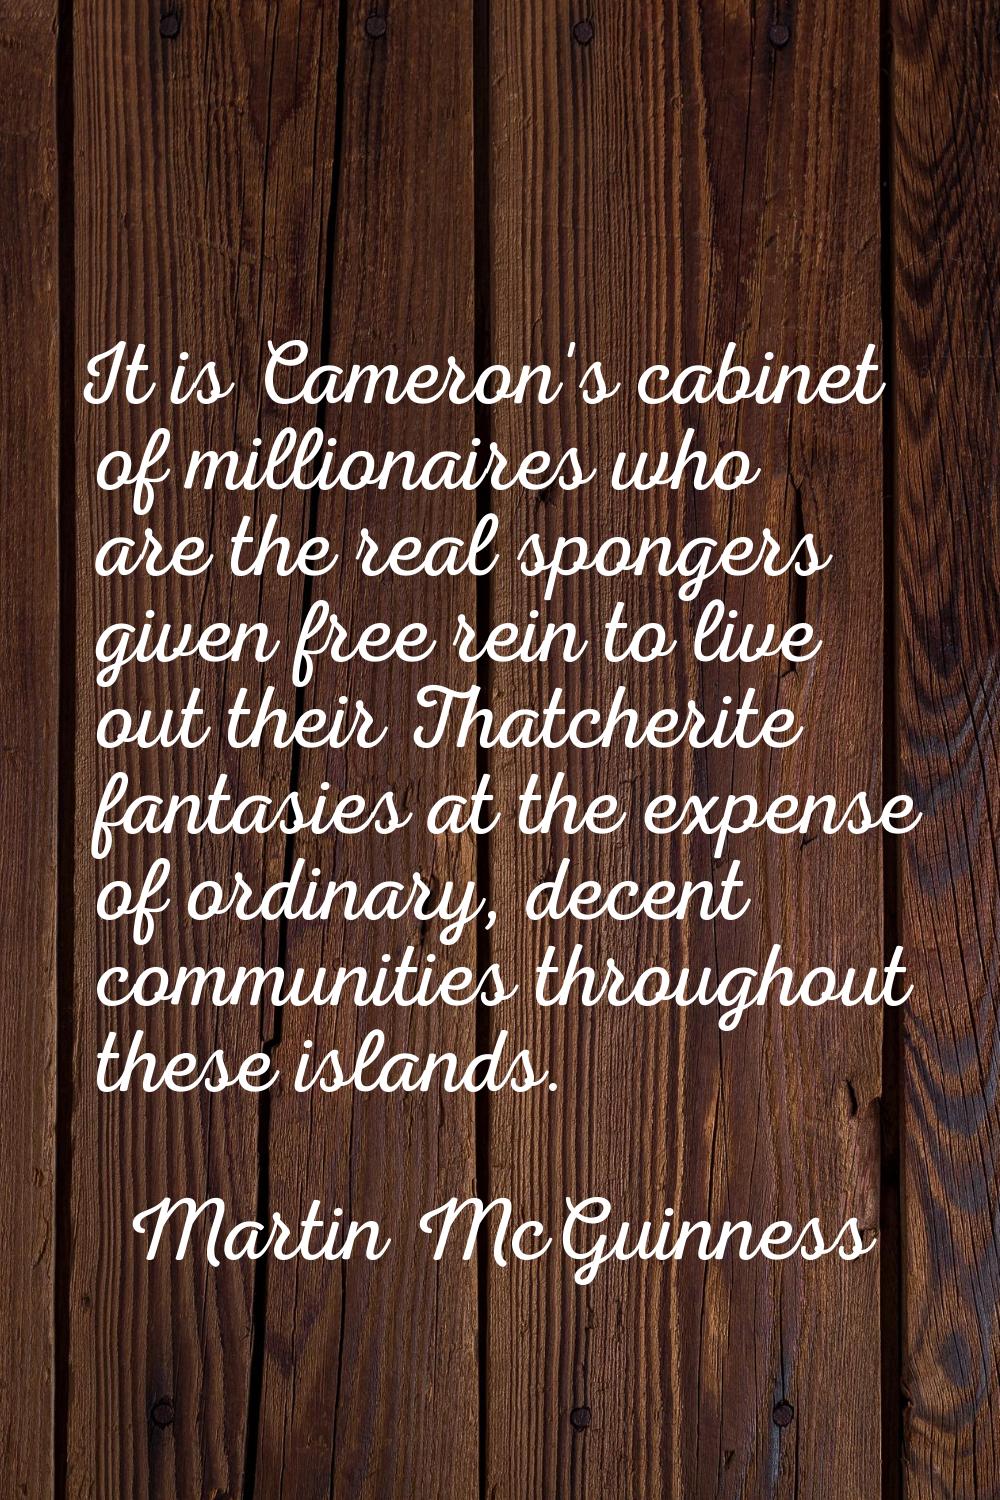 It is Cameron's cabinet of millionaires who are the real spongers given free rein to live out their